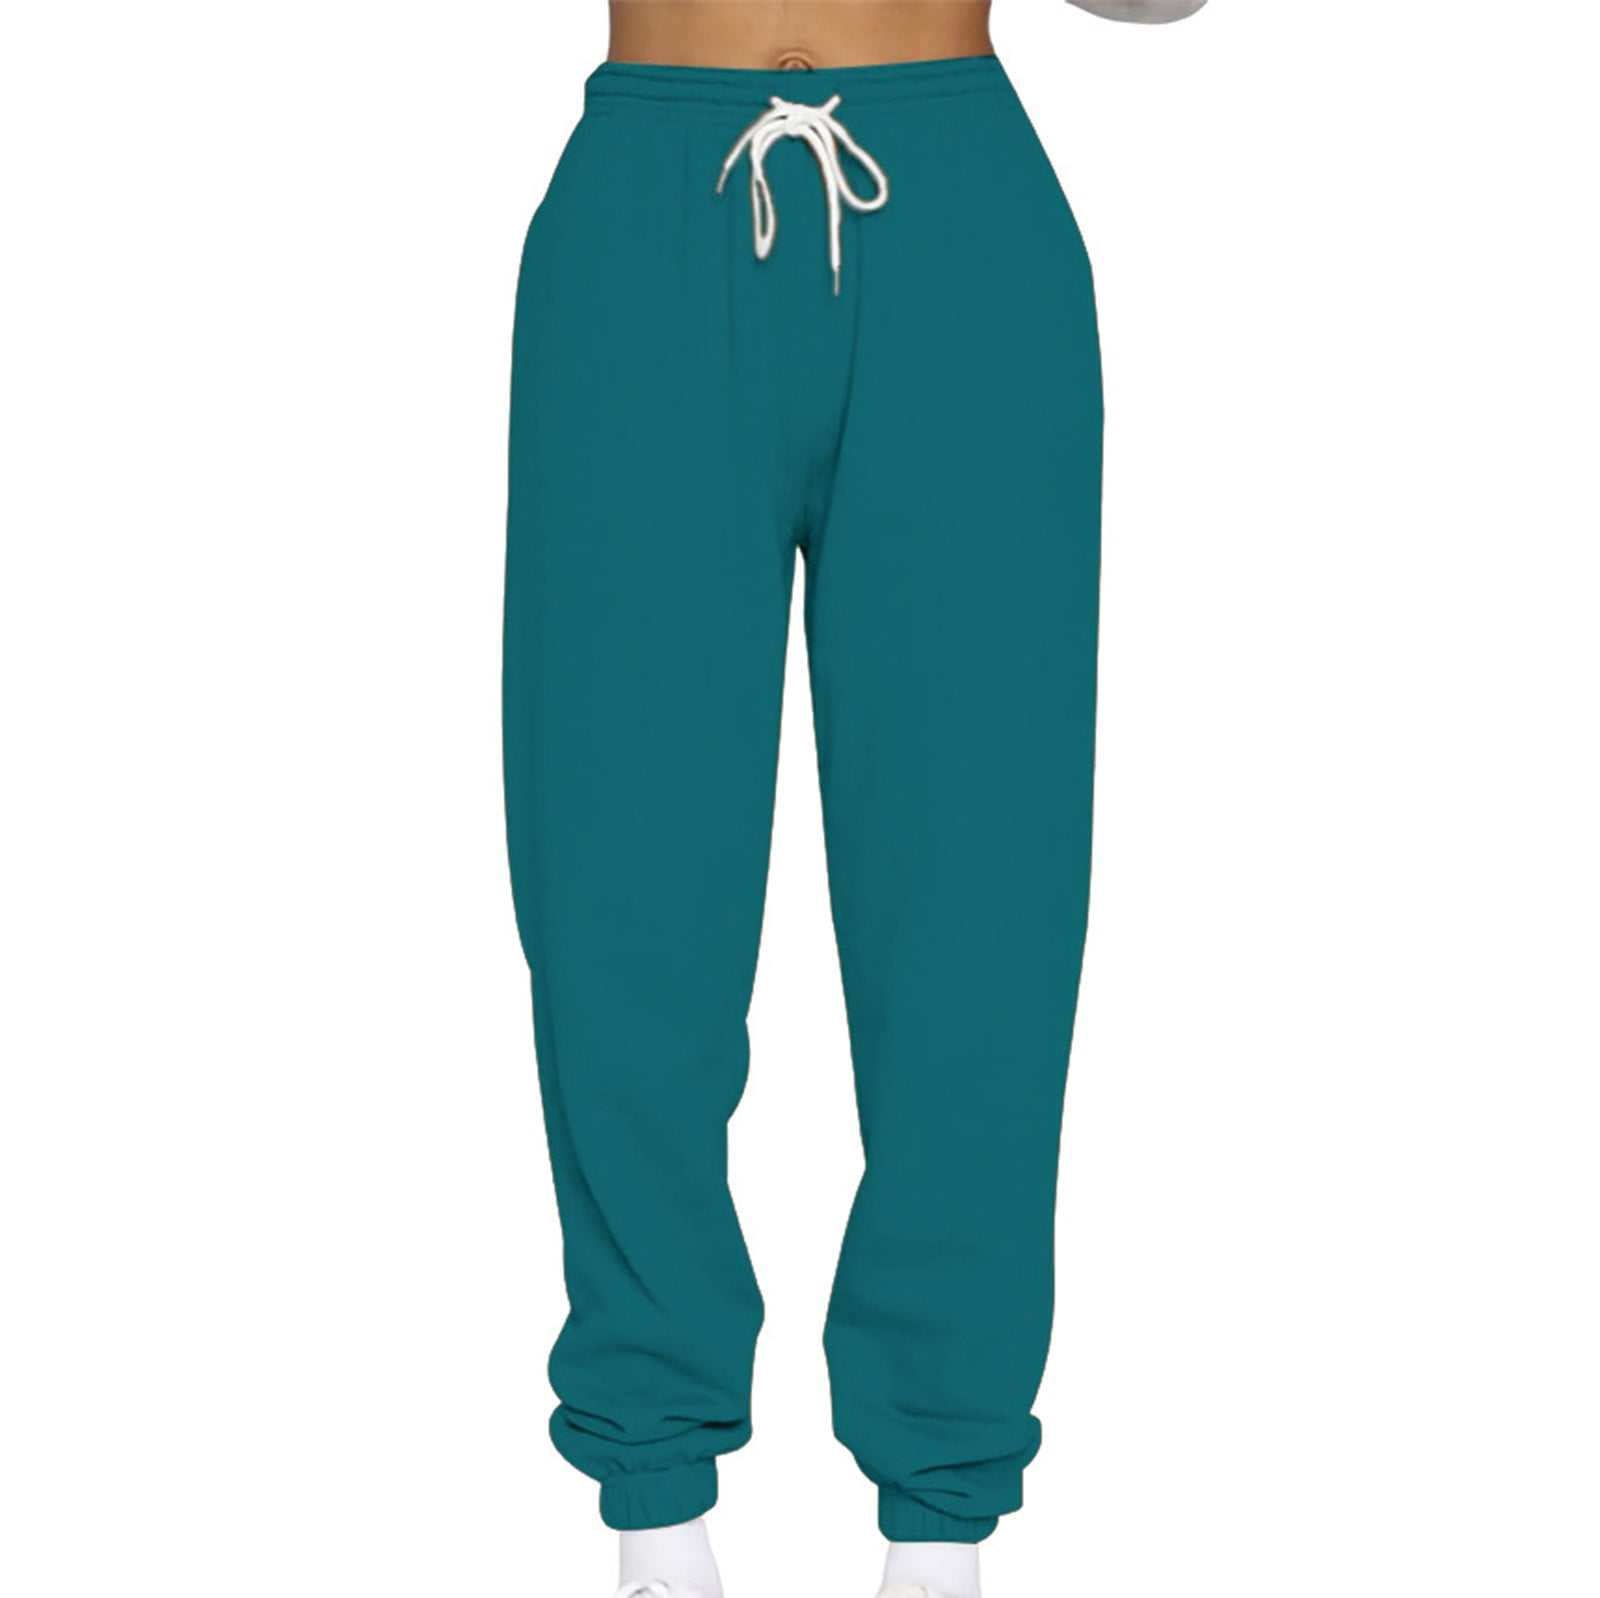 Up to 60% Off! Ganfancp Women Sweatpants Women Loose Pants with